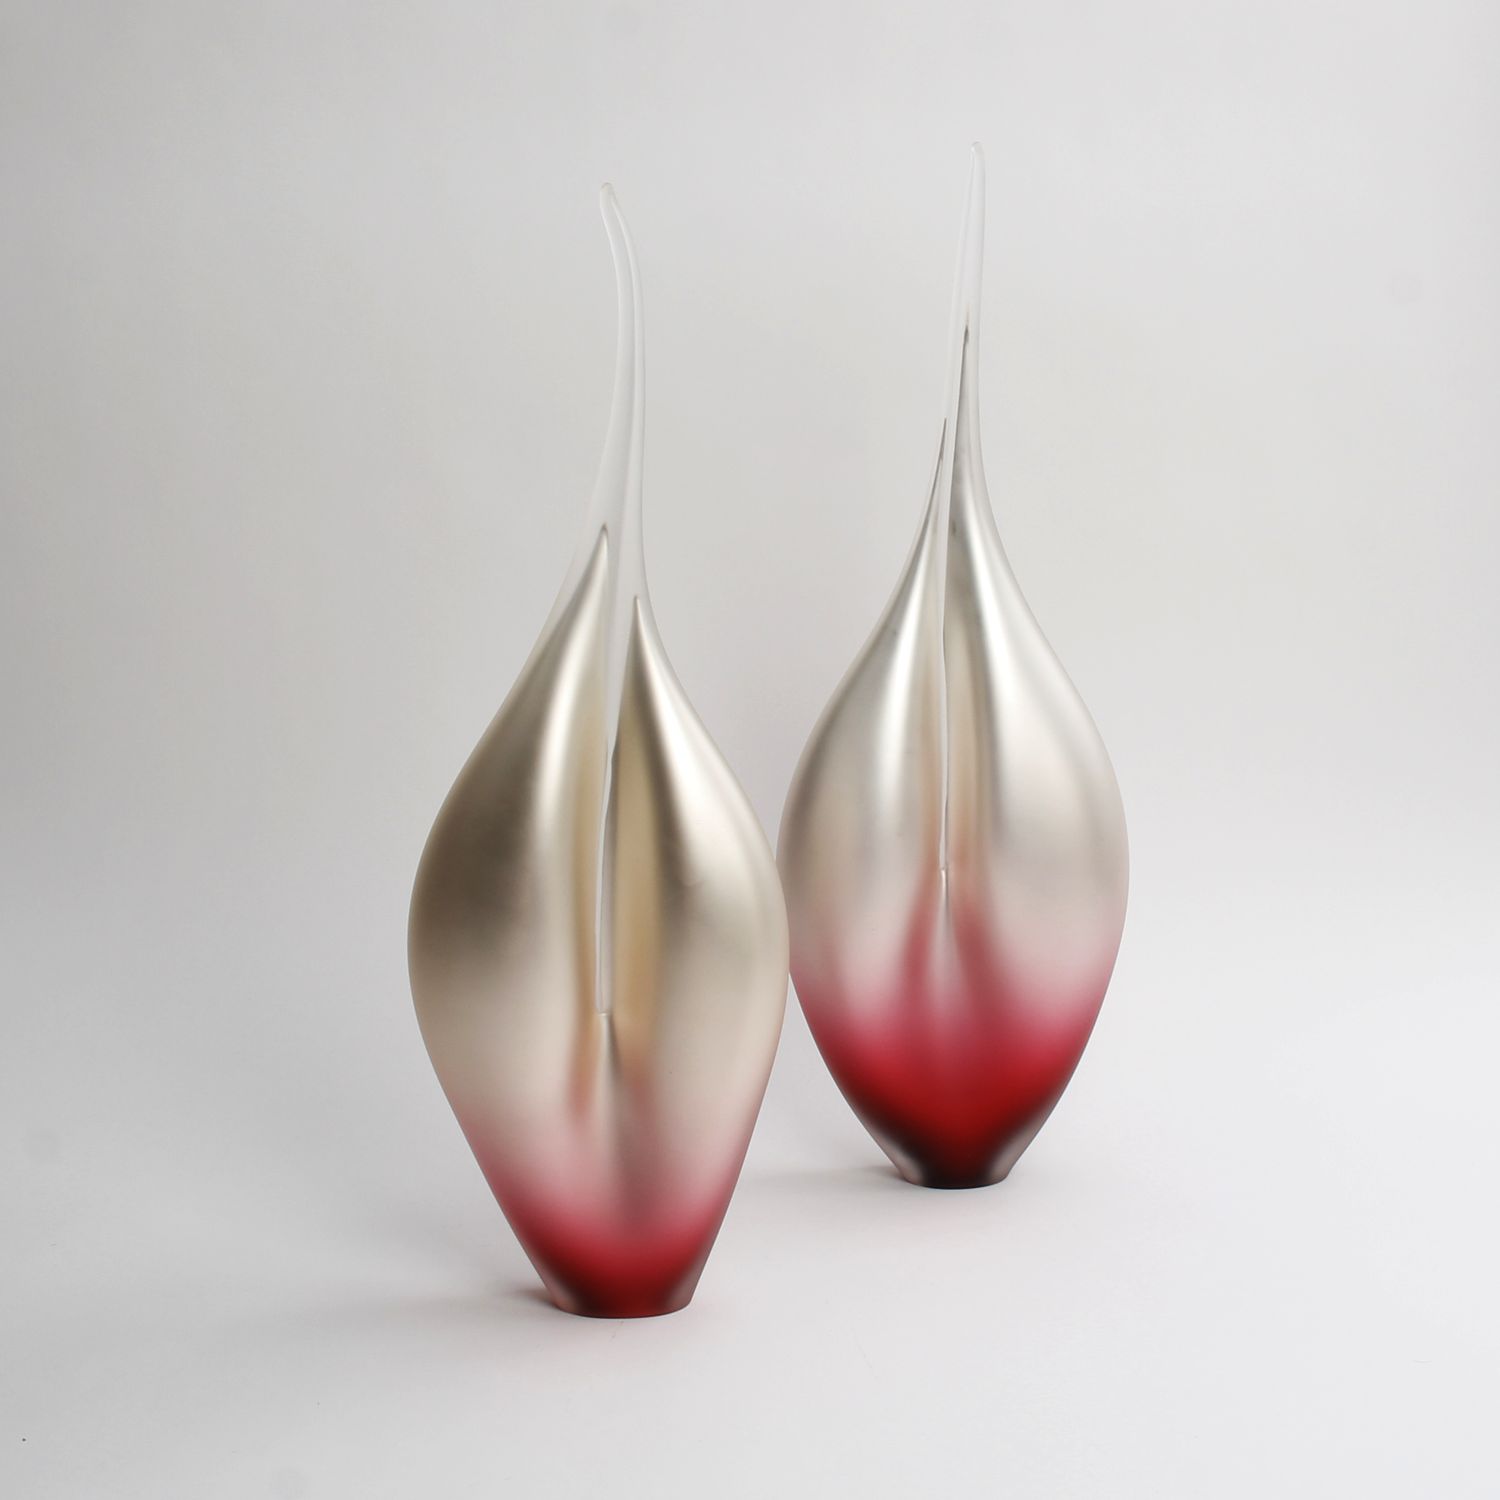 Soffi Studio: Large Pink Pearl Flame Product Image 2 of 2